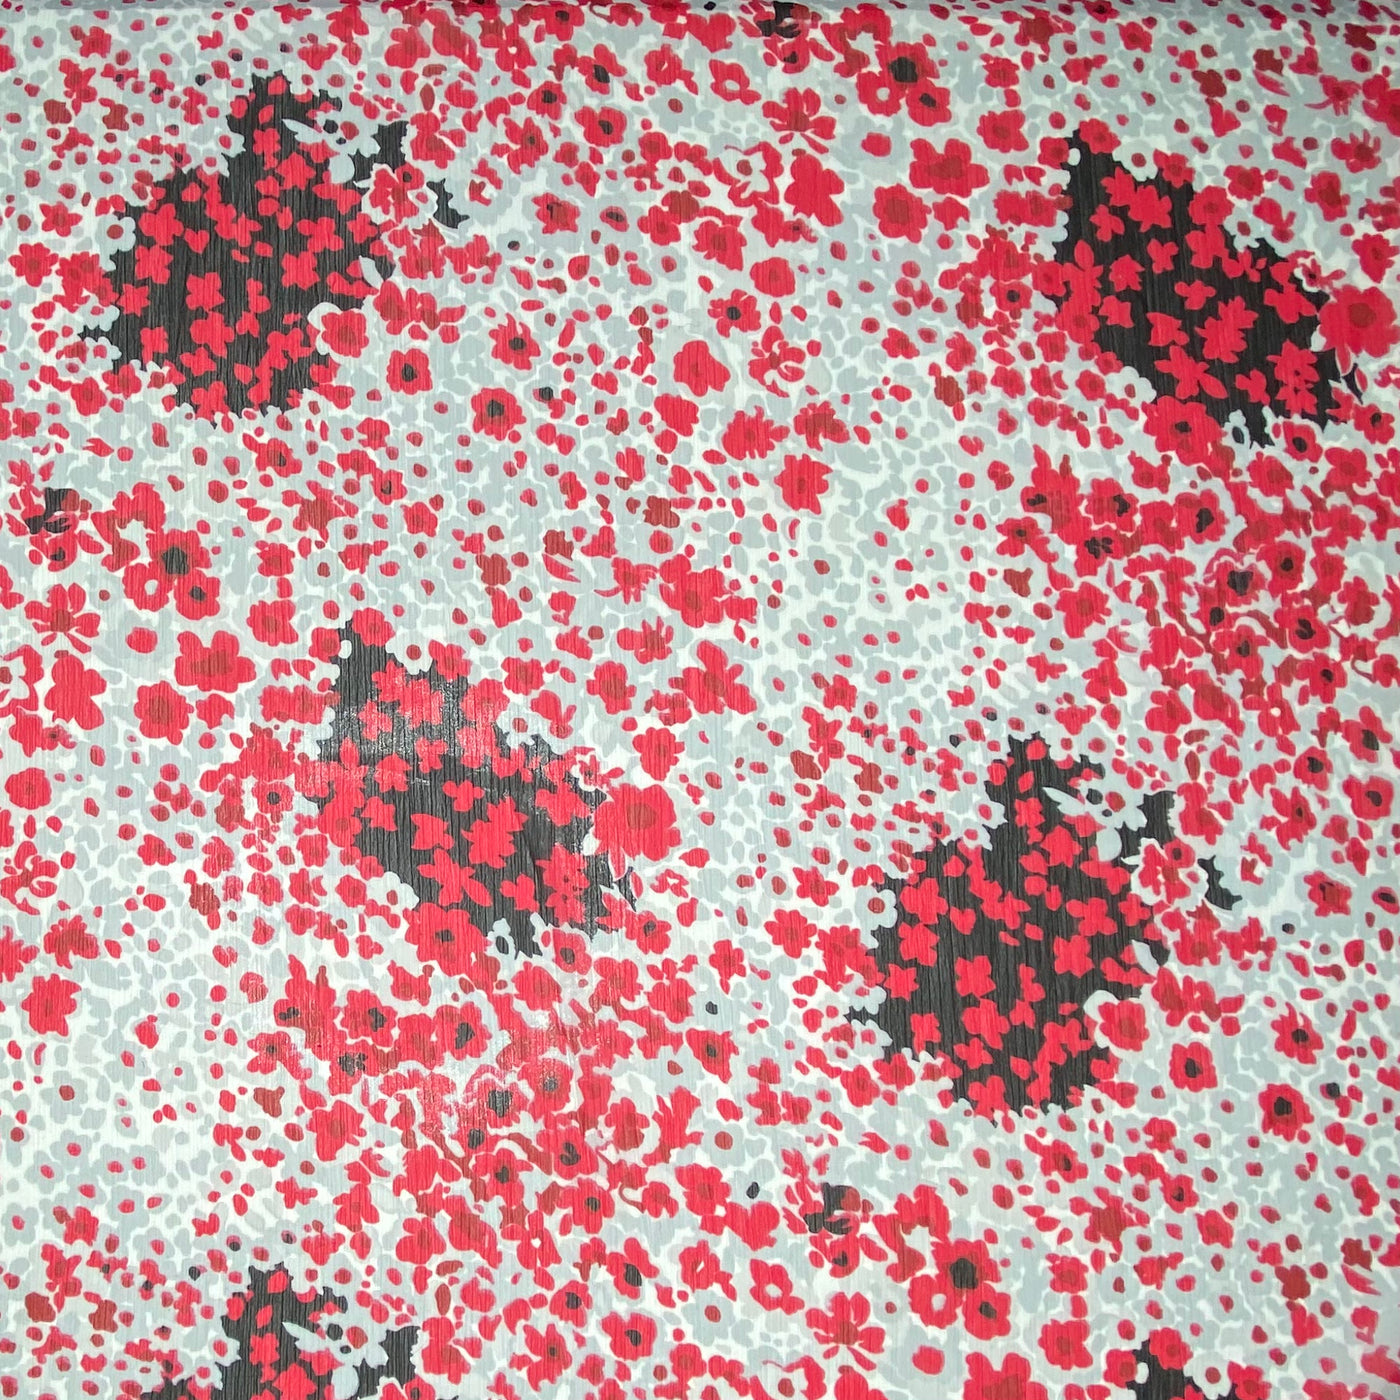 Floral Crinkled Polyester Chiffon - 60” - Red/Black/Grey/White